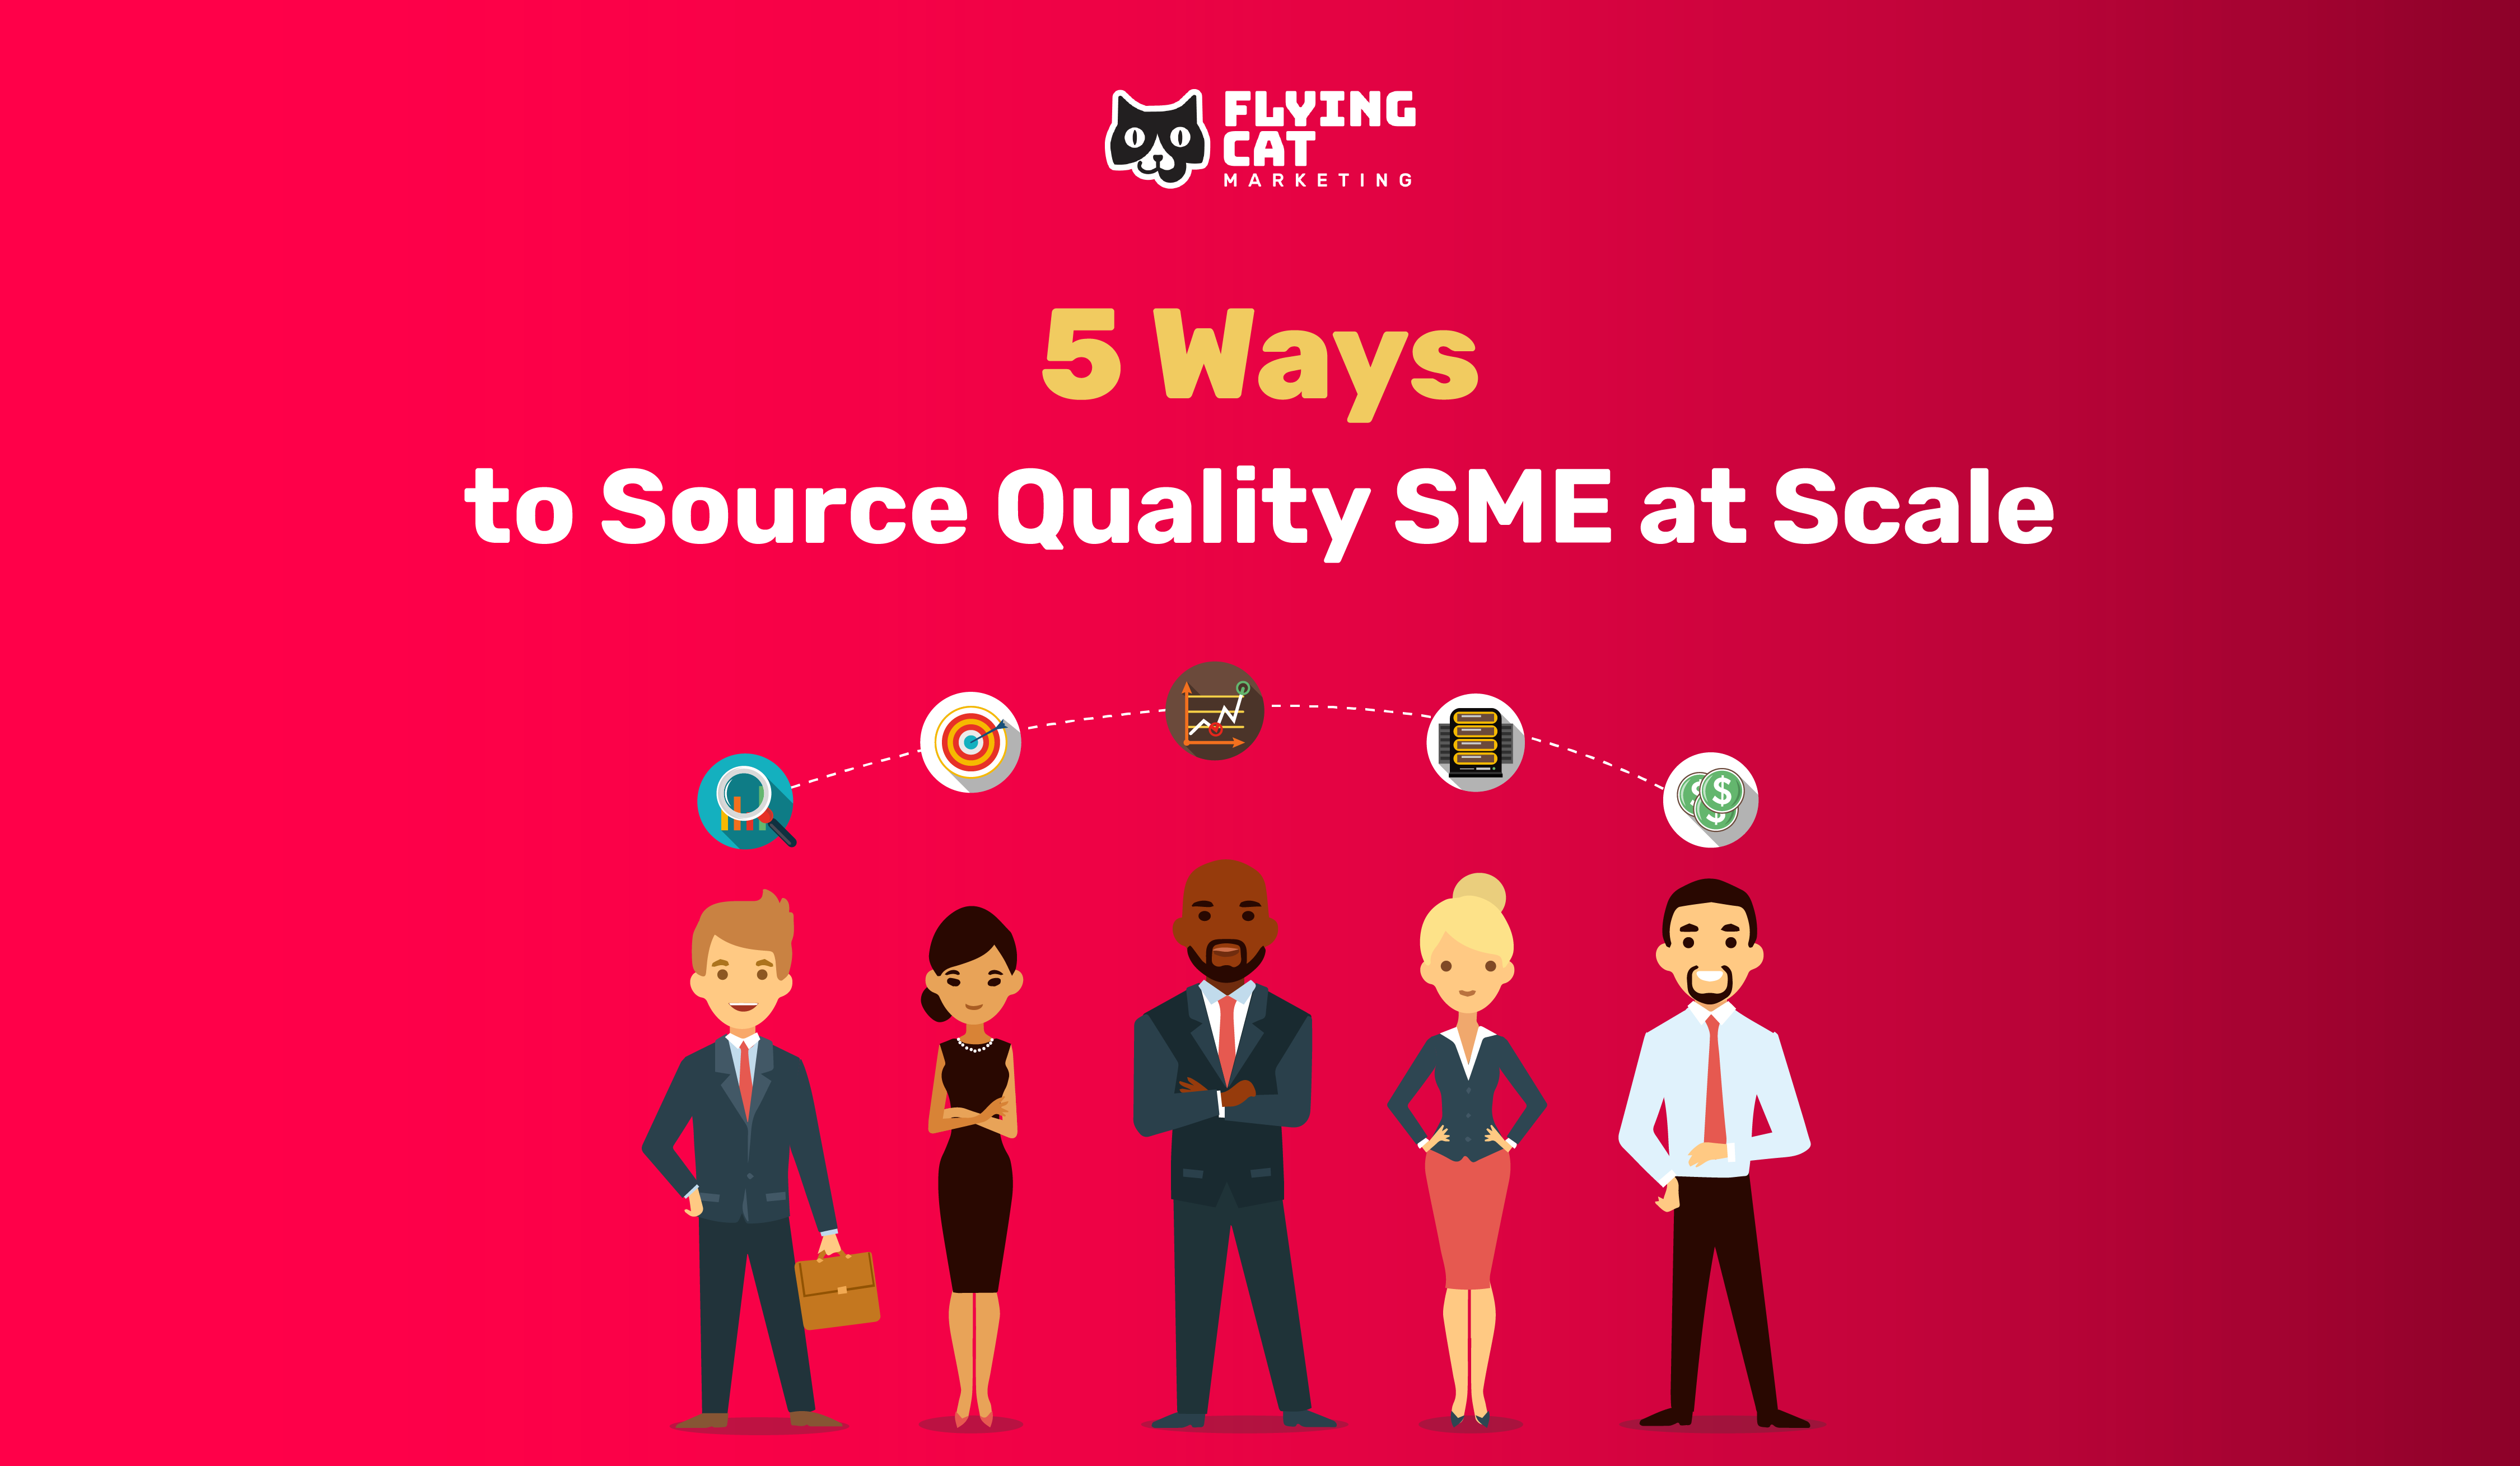 5 Ways to Source Quality SME at Scale